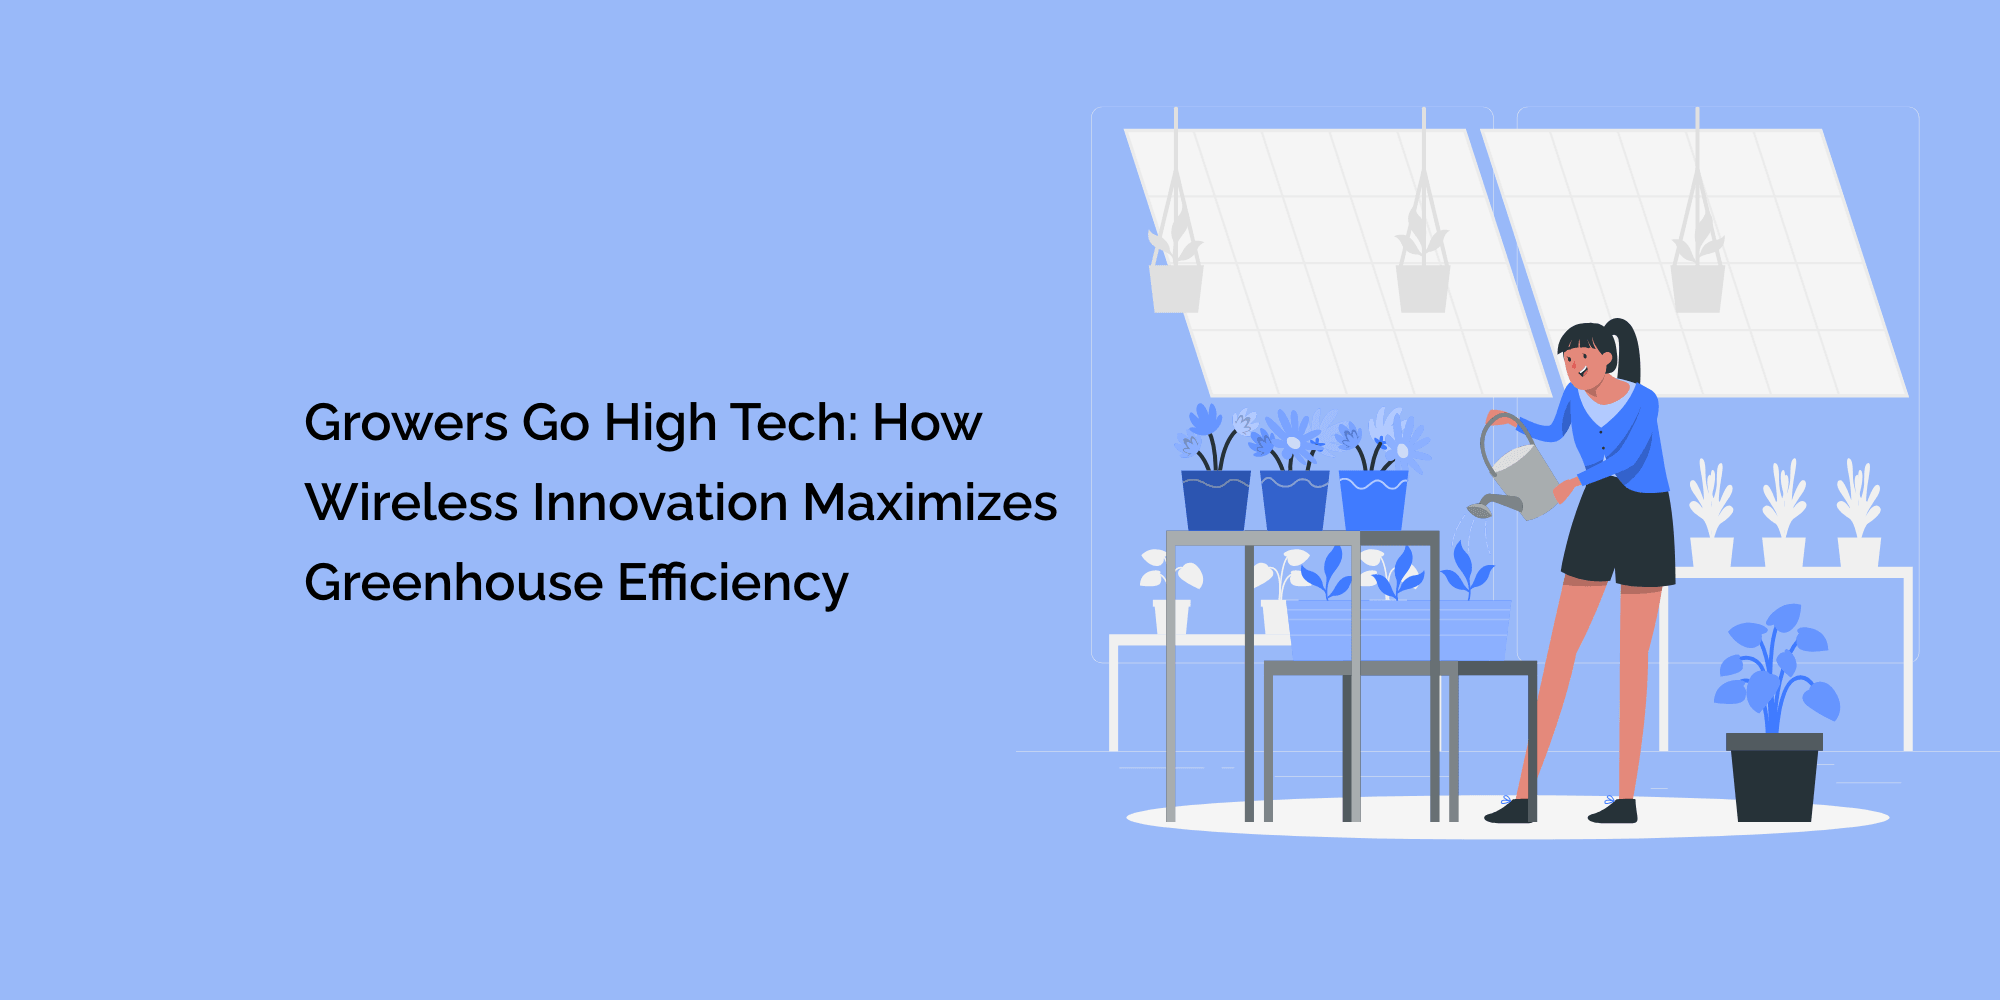 Growers Go High Tech: How Wireless Innovation Maximizes Greenhouse Efficiency